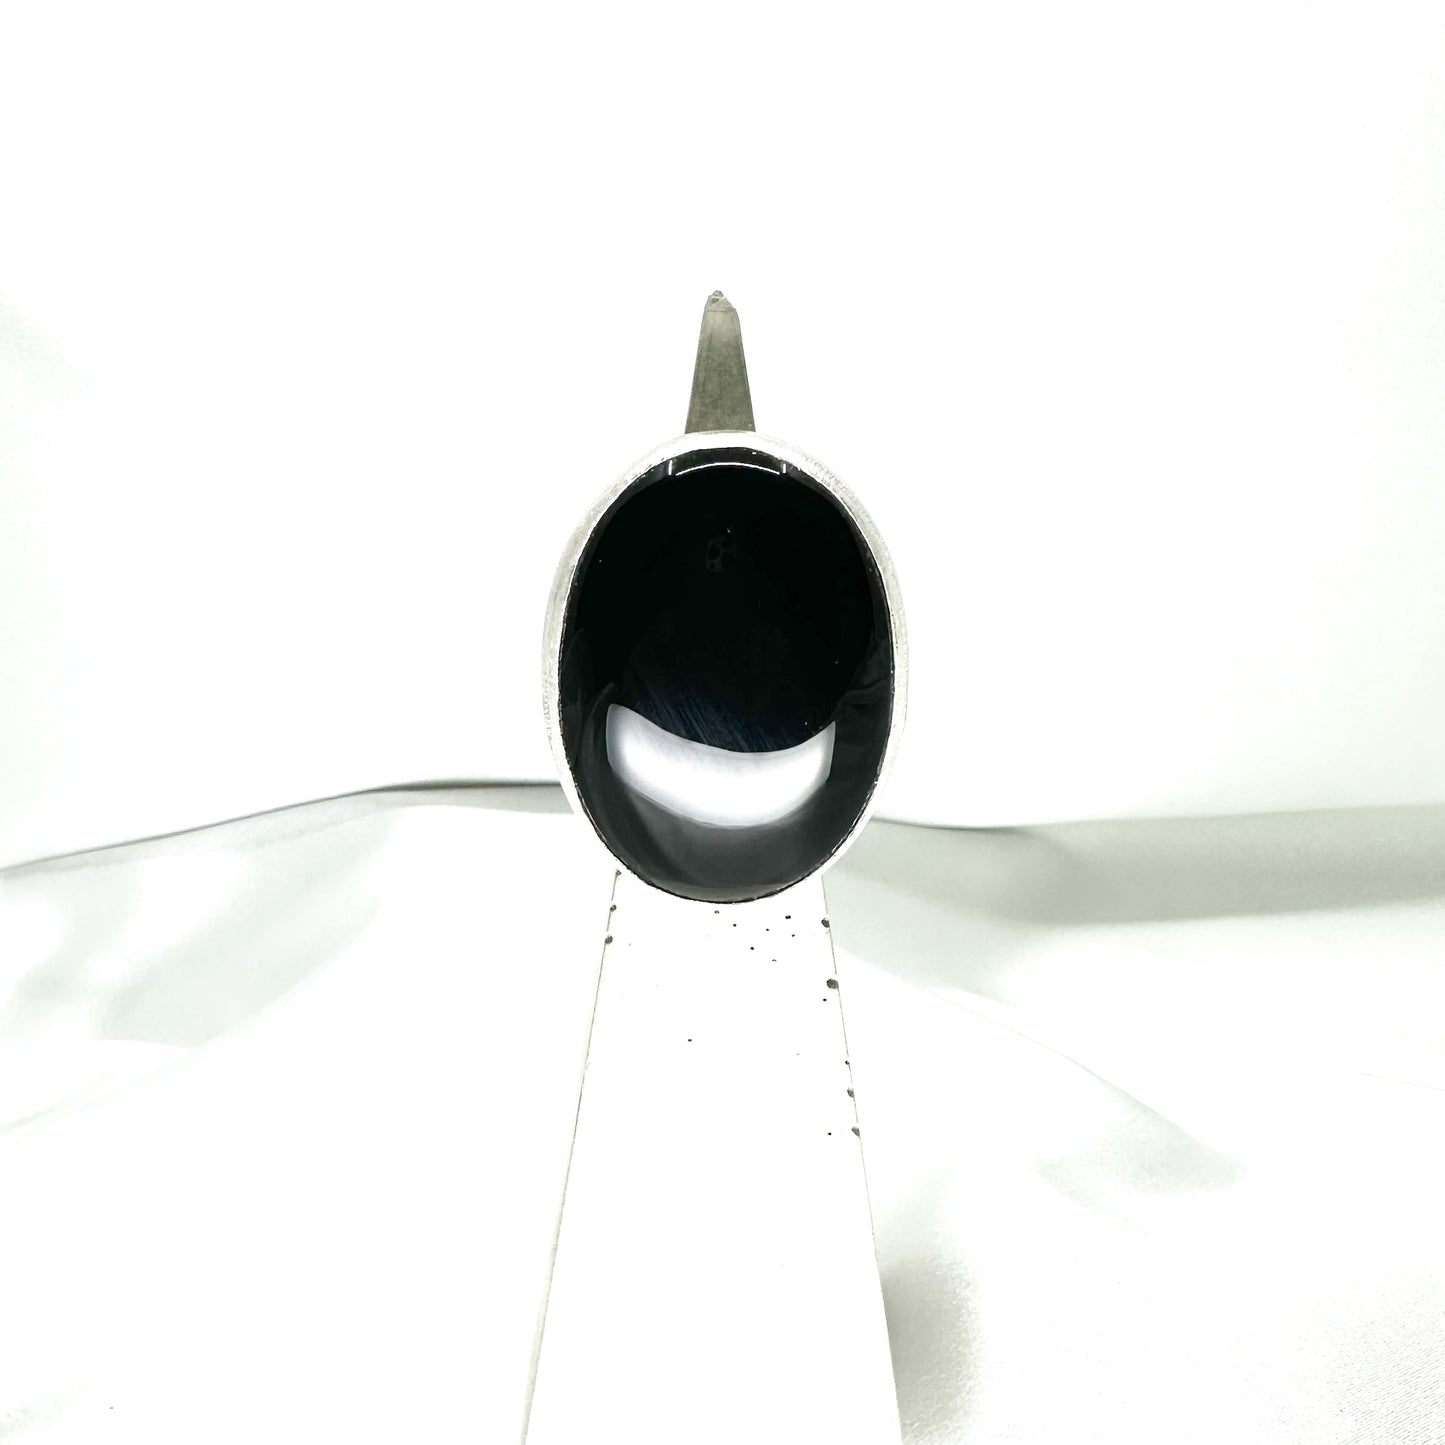 Black Onyx Cocktail Ring in Sterling Silver, size US 8, EU 57, UK P1/2